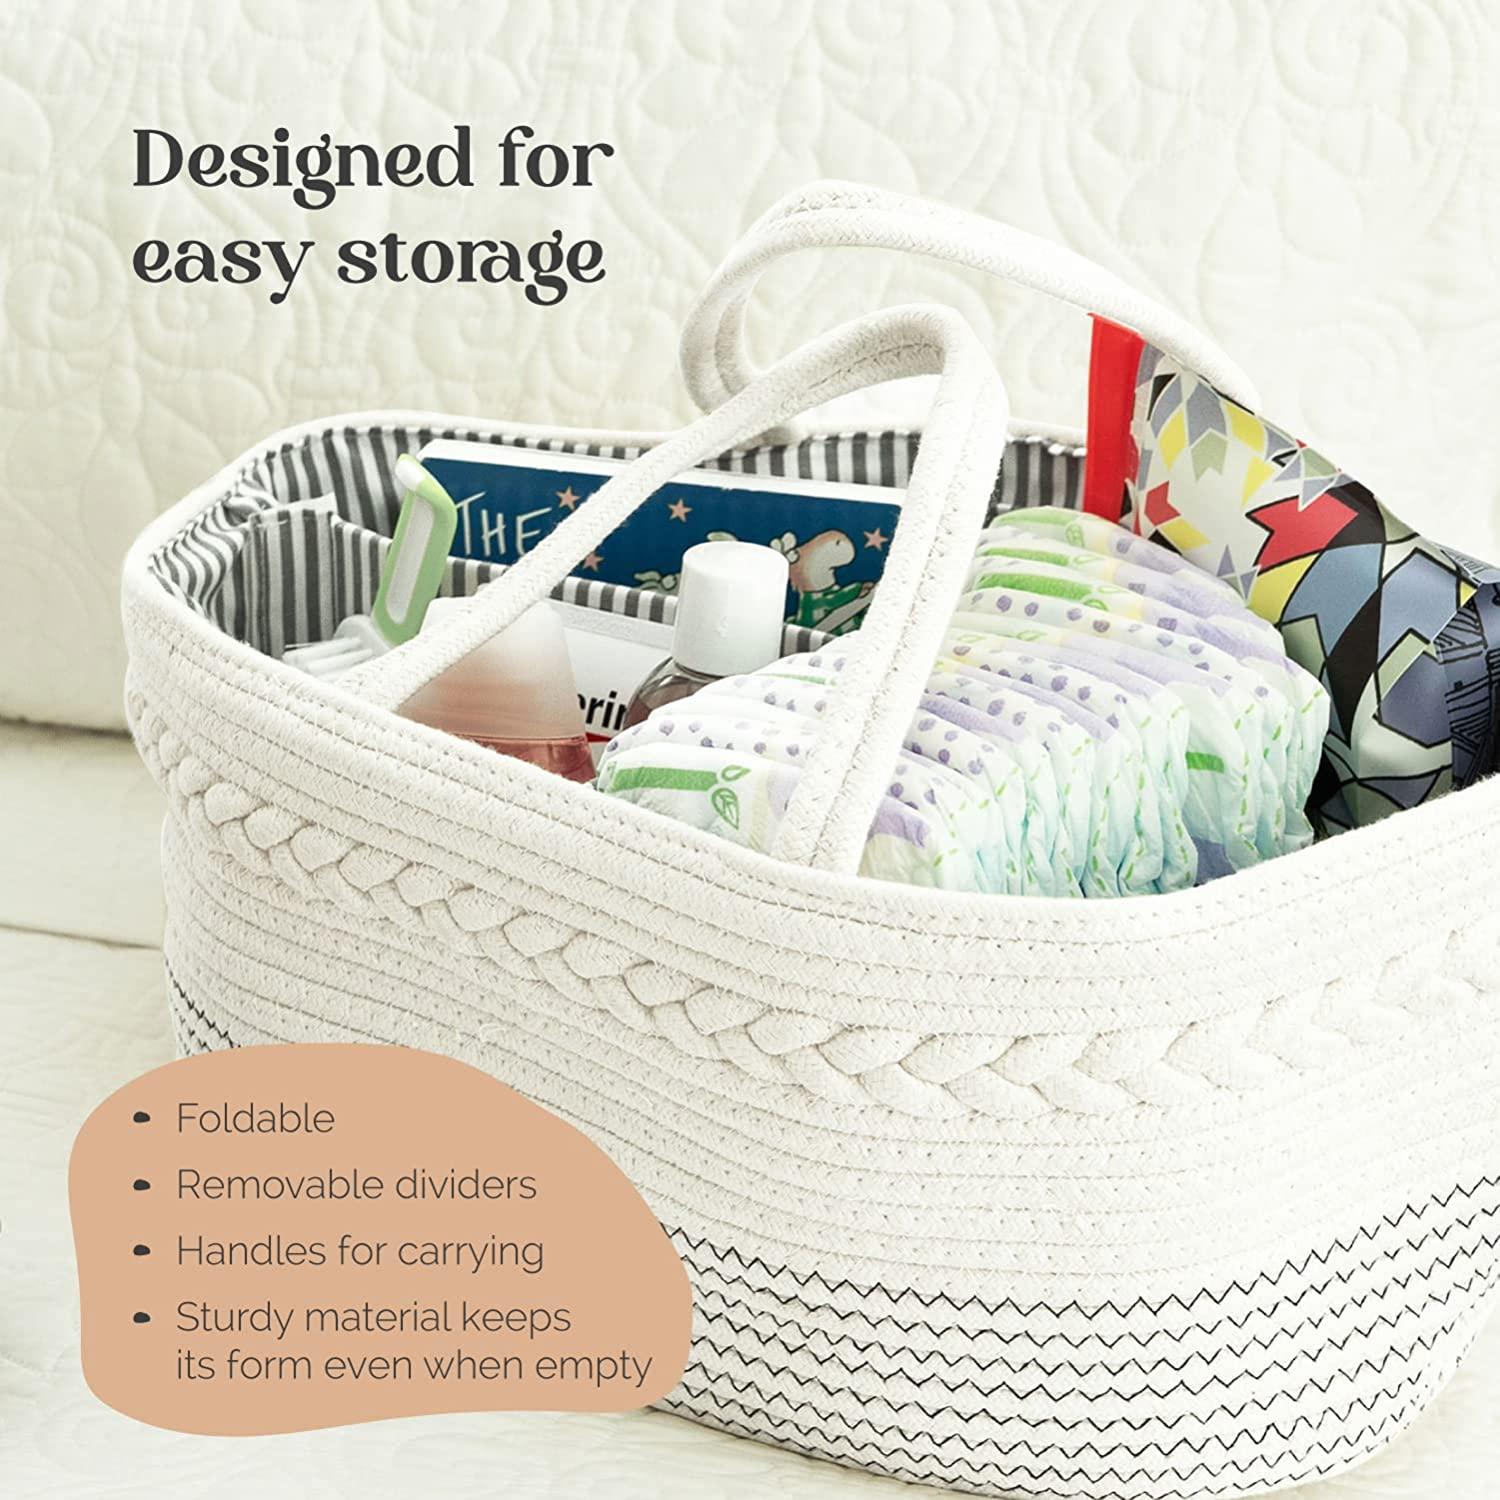 Rirool Baby Diaper Caddy - Nursery Diaper Tote Bag - Large Portable Car Travel Organizer - Boy Girl Diaper Storage Bin for Changing Table - Baby Shower Gift